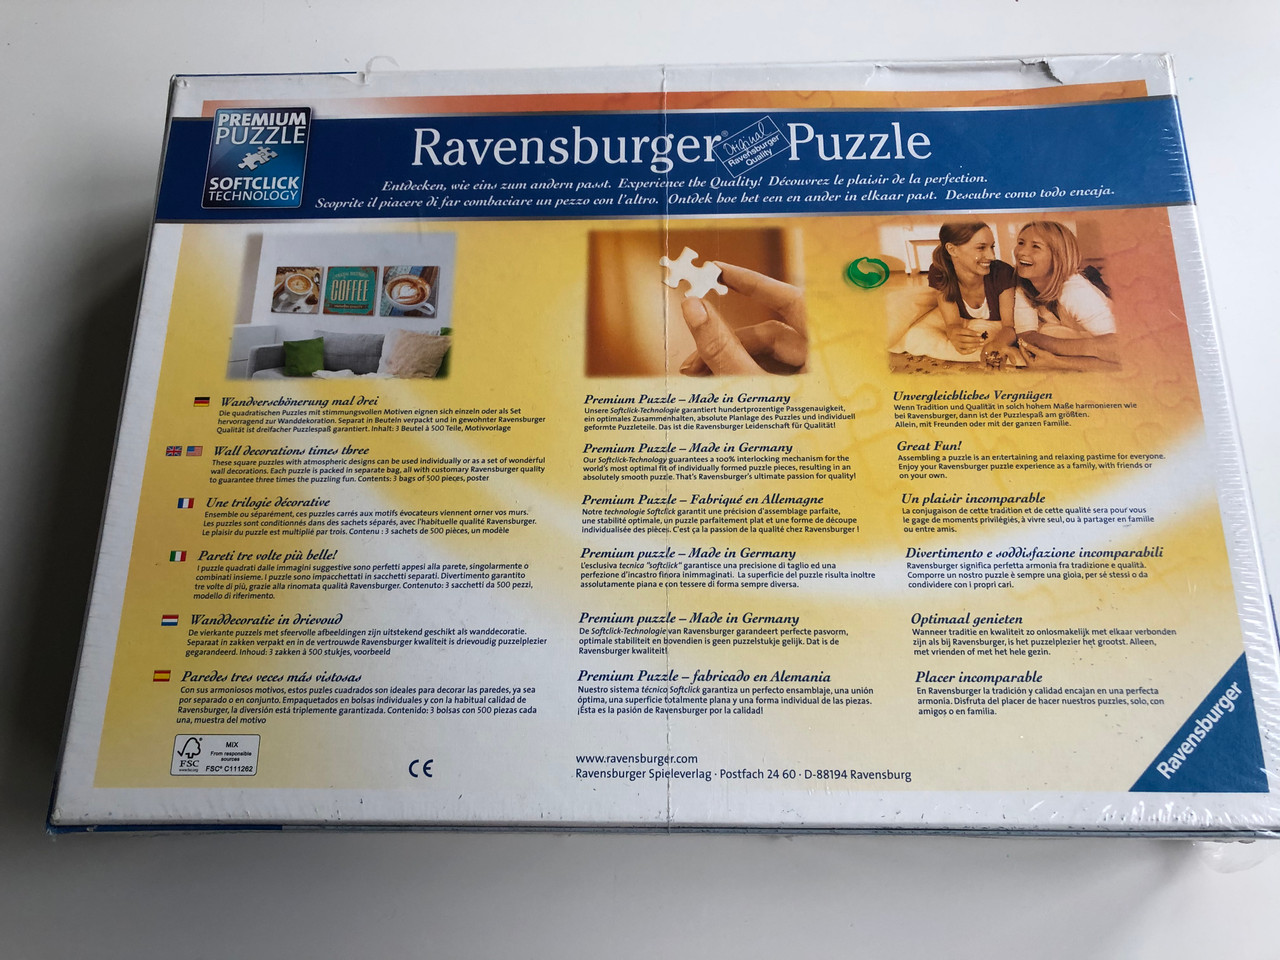 Ravensburger Puzzle 19923 - 3x500 / Wall decorations times three - New York  City Impressions / Premium Puzzle - Softclick technology / 3 bags of 500  pieces, poster - bibleinmylanguage